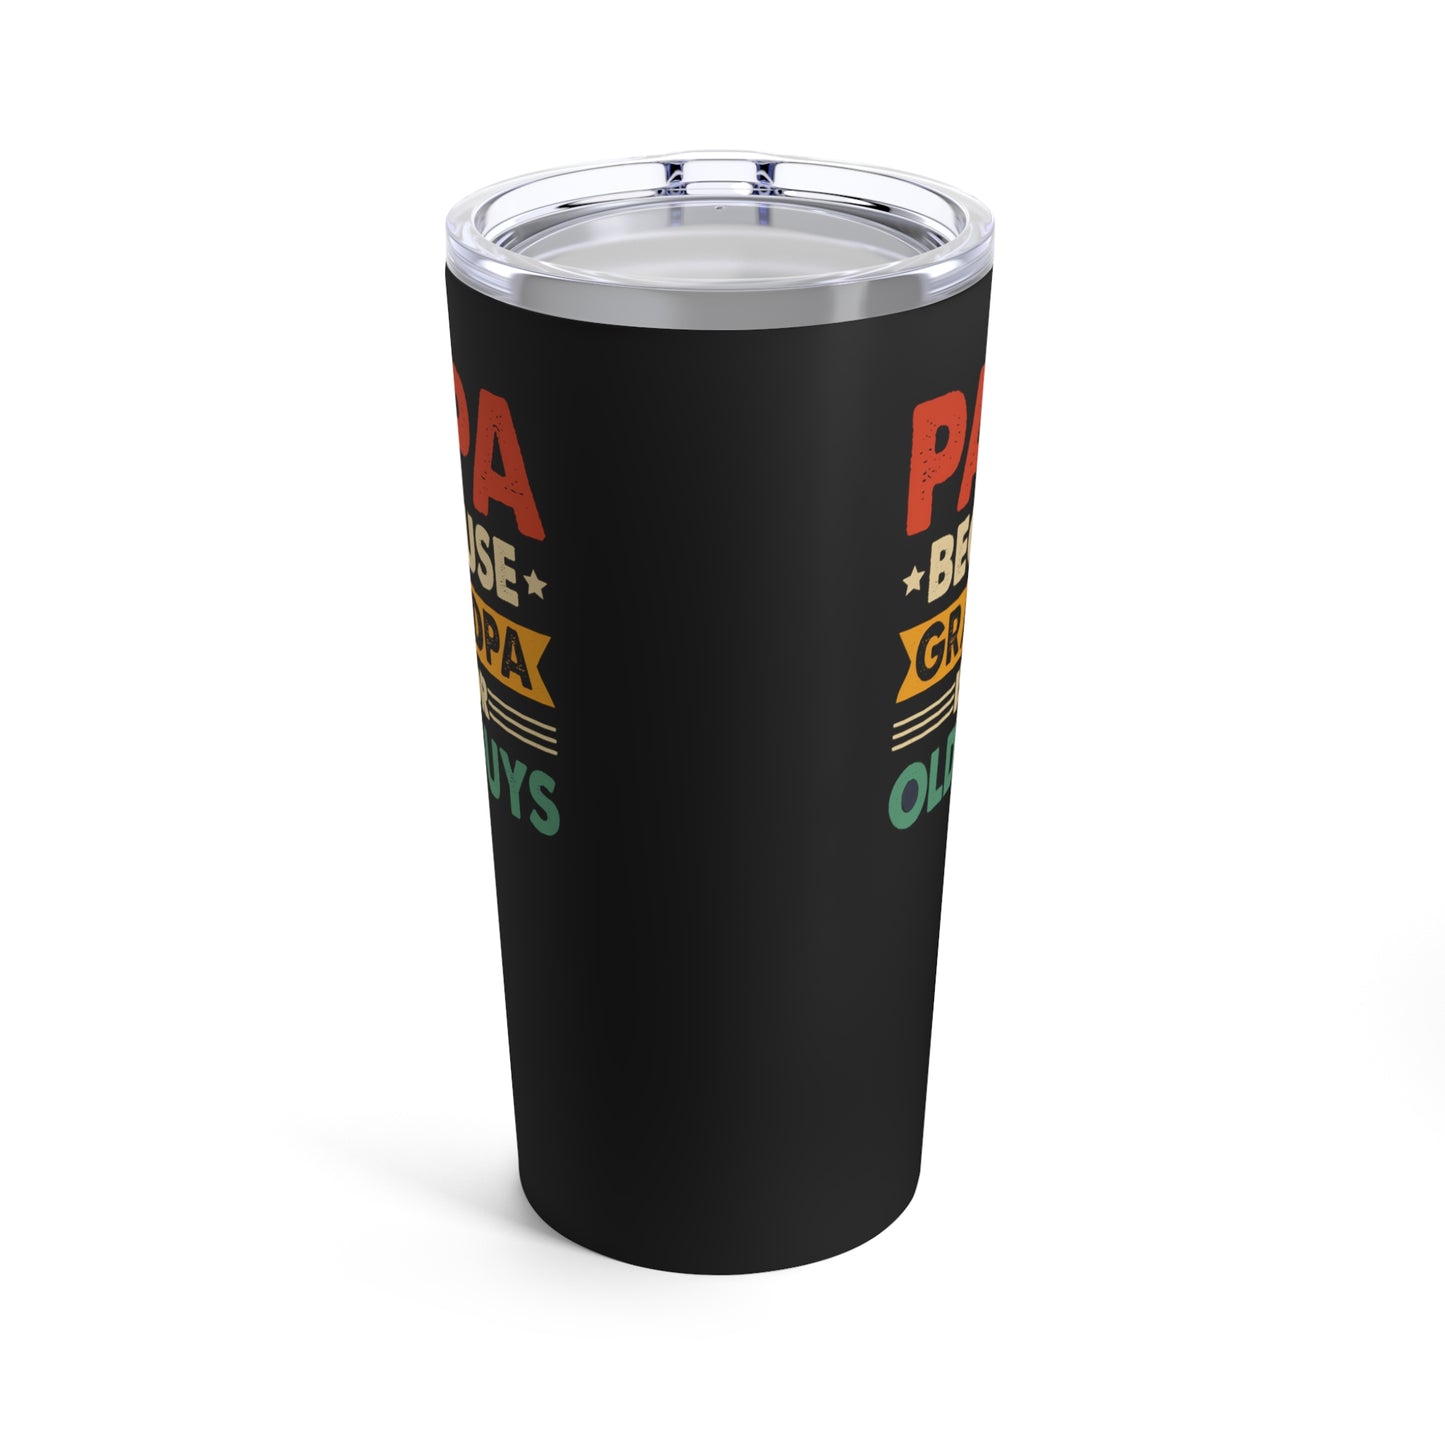 "Grandpa is for Old Guys" 20oz Stainless Steel Tumbler